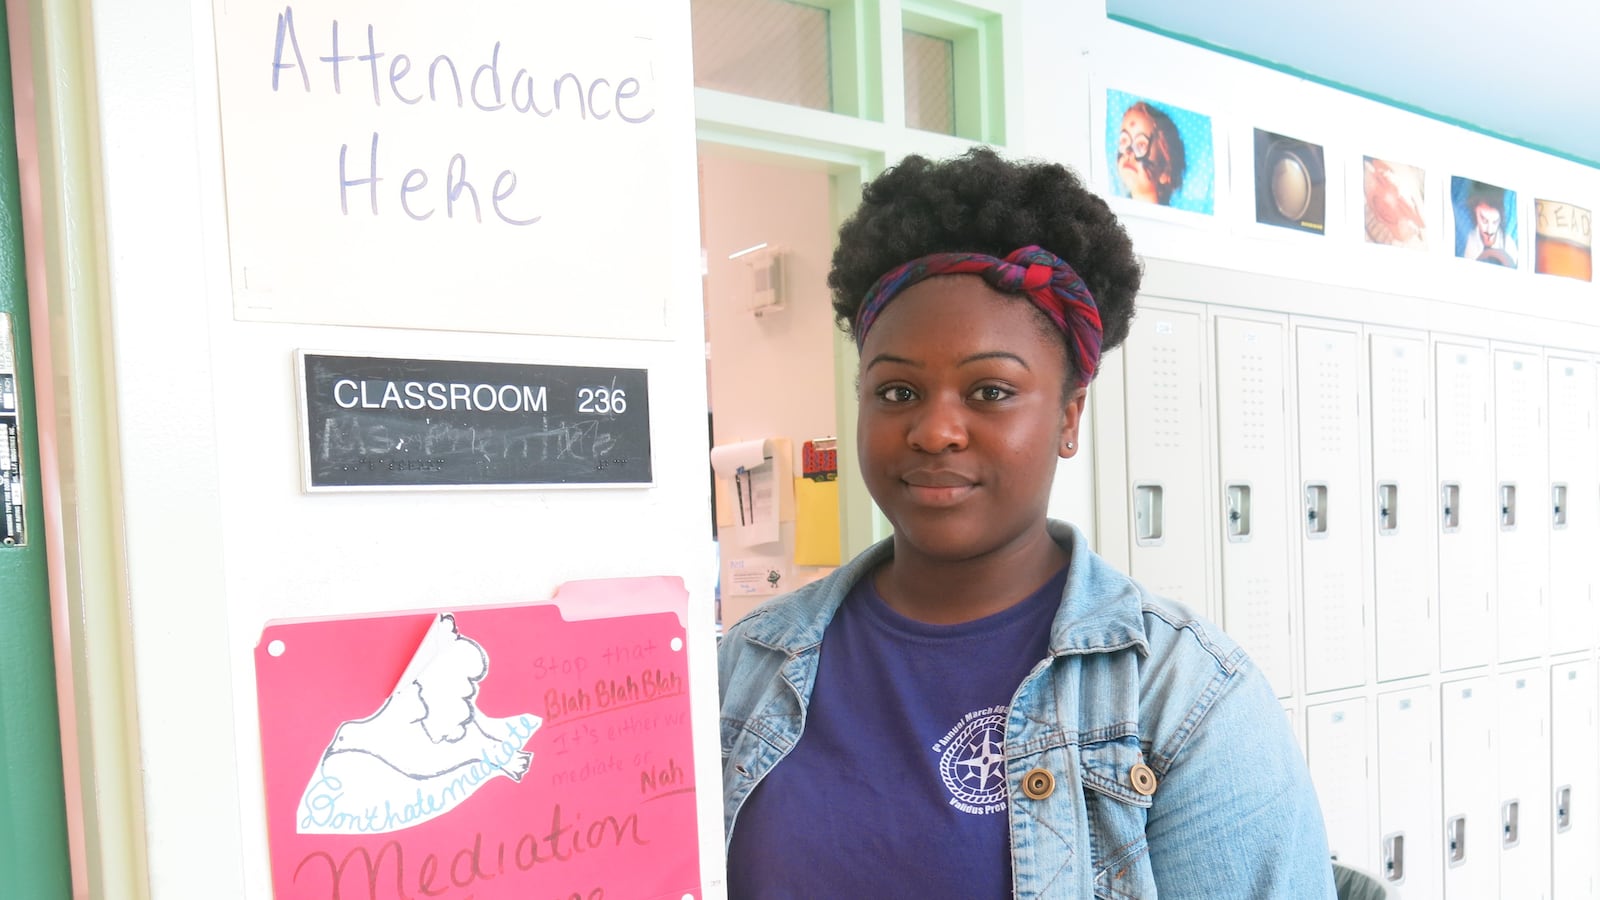 Senior Judith Nkwor is a peer mediator at Validus Prep, a school that has implemented new discipline strategies that aim to minimize suspensions.